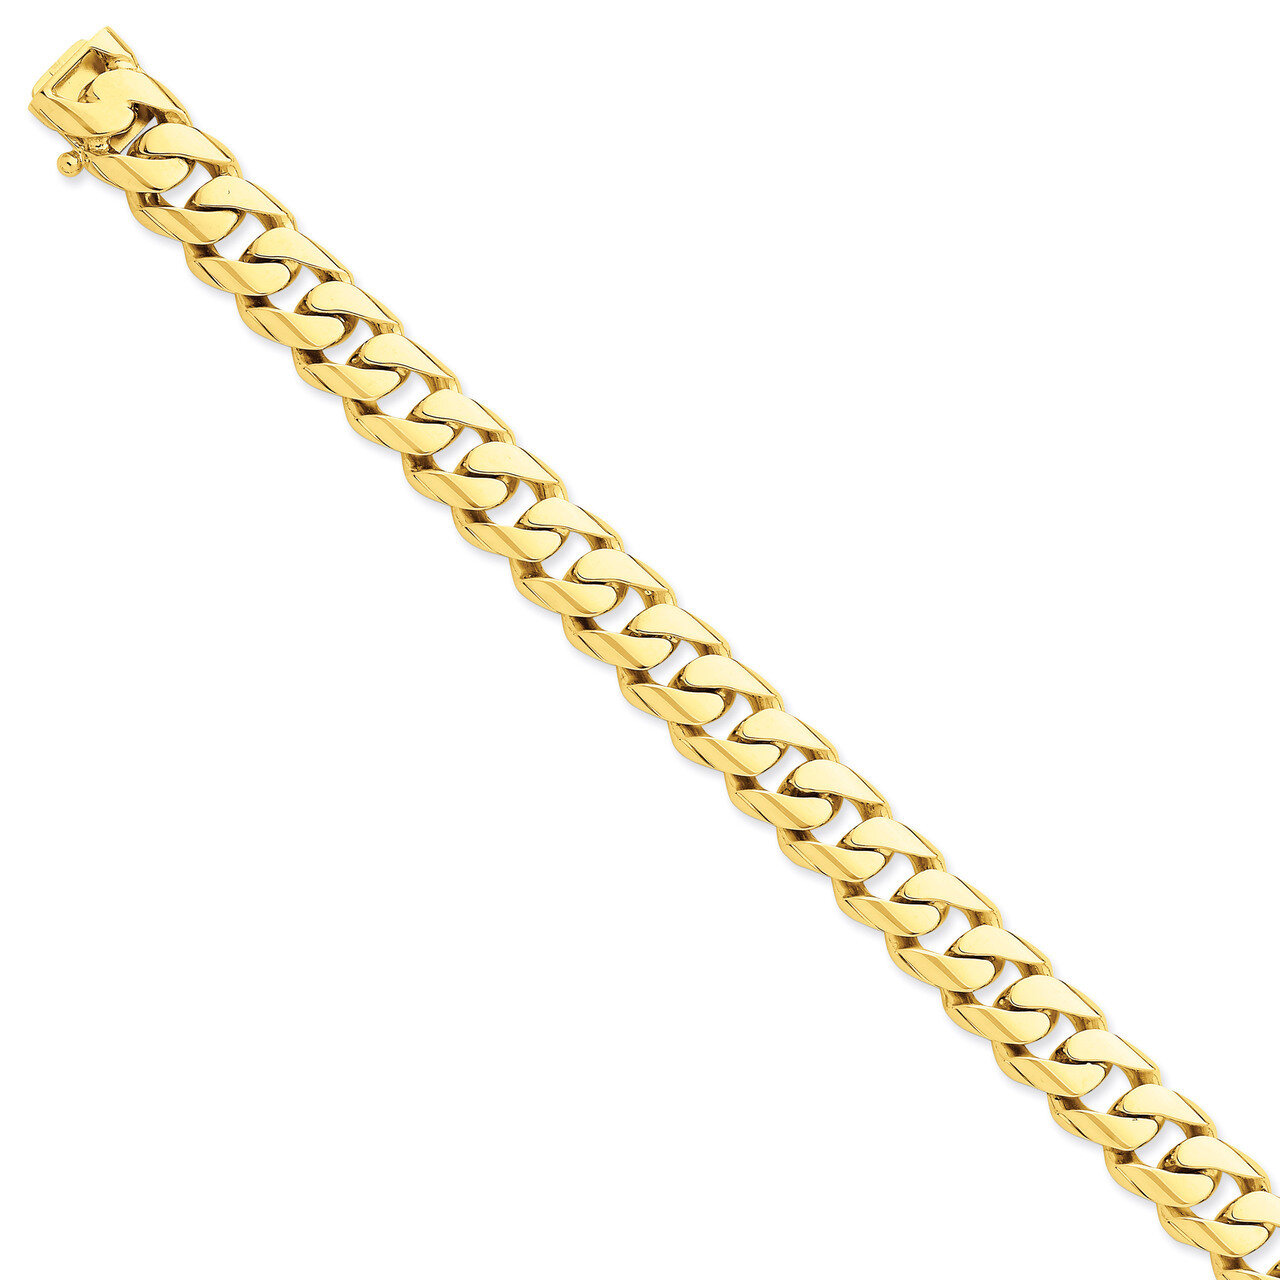 11mm Hand-polished Rounded Curb Chain 8 Inch 14k Gold LK127-8